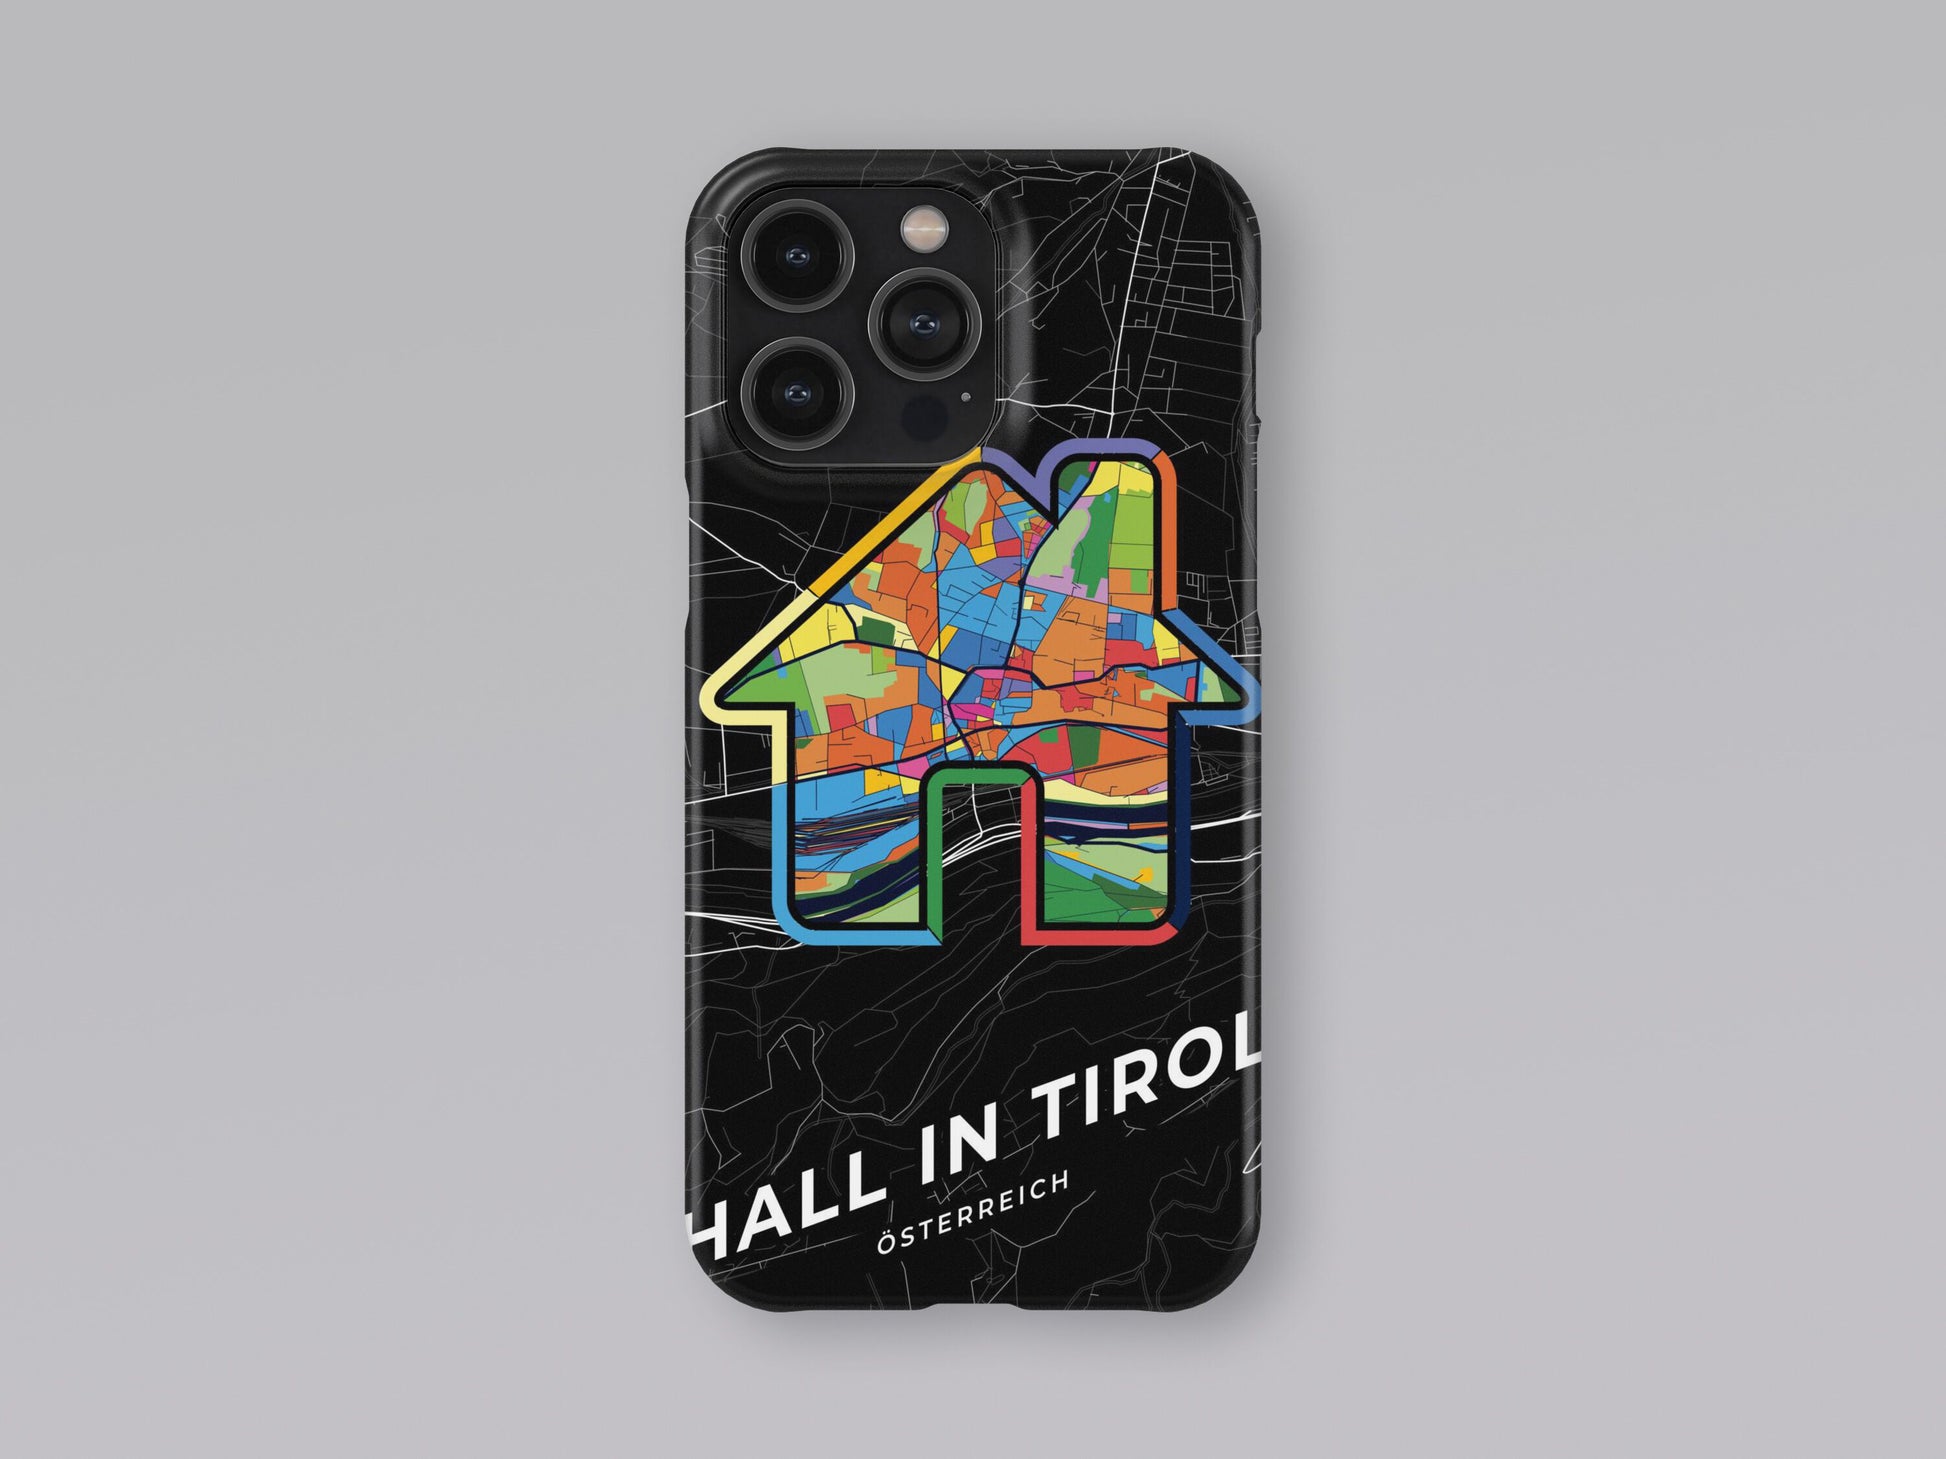 Hall In Tirol Österreich slim phone case with colorful icon. Birthday, wedding or housewarming gift. Couple match cases. 3